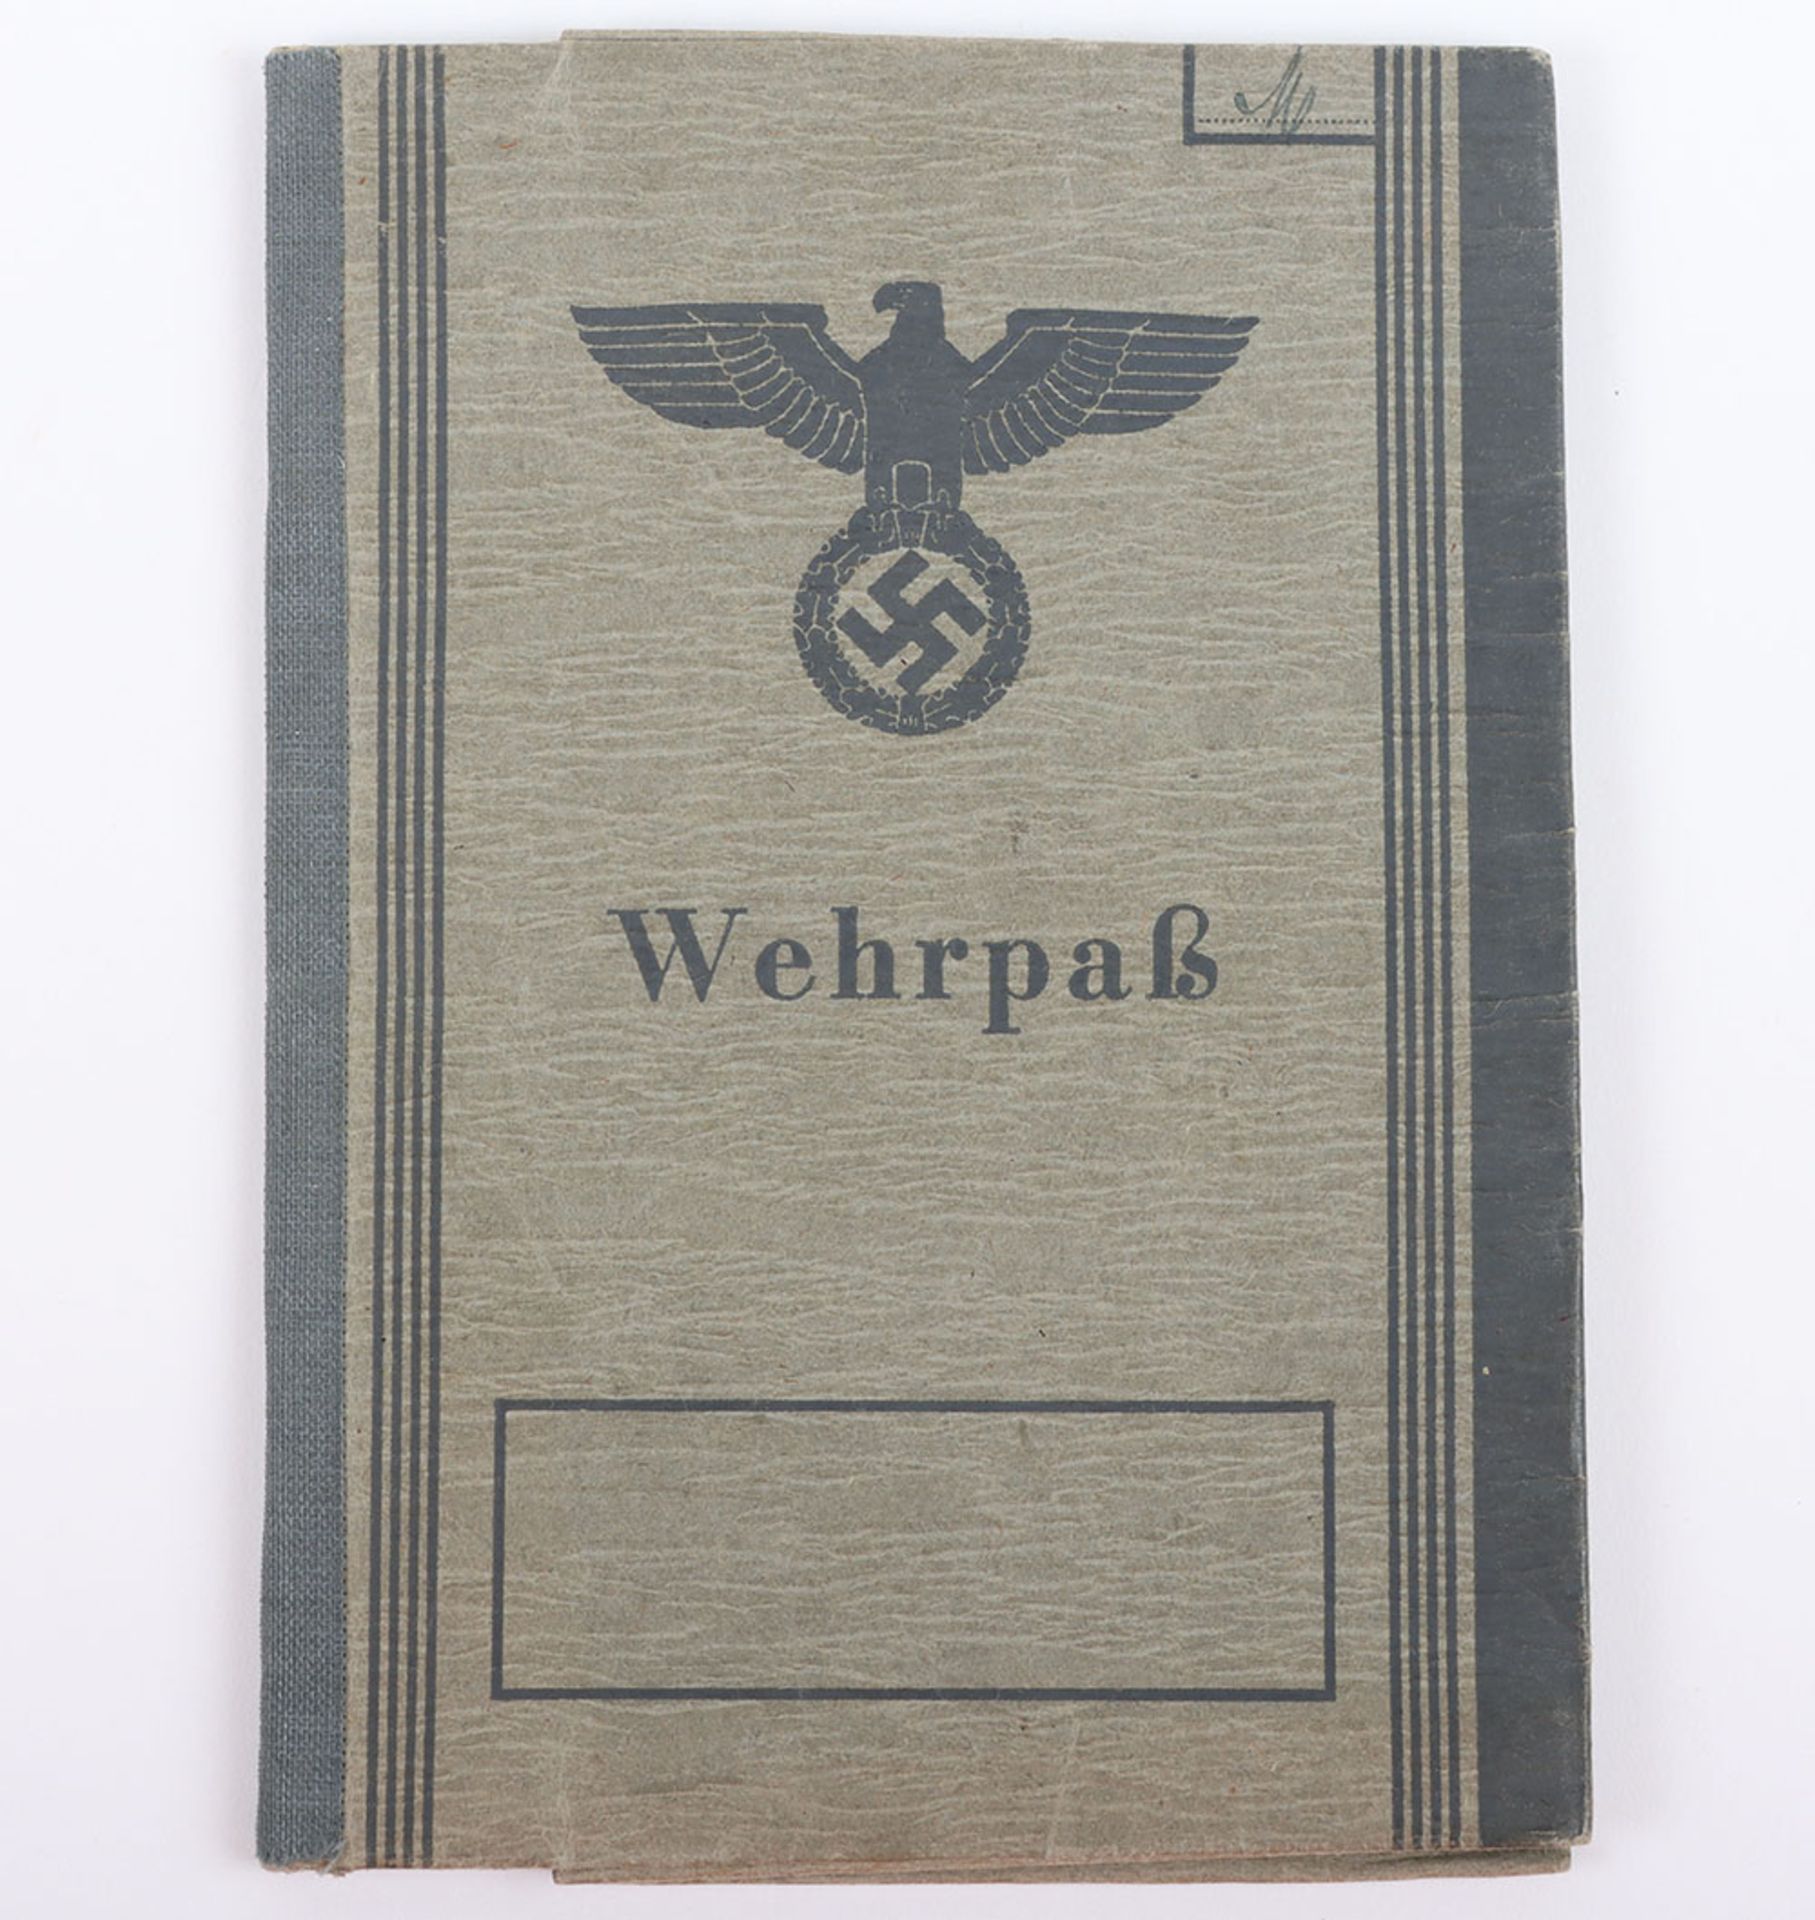 WW2 German Armed Forces Wehrpass Issued in April 1945 - Image 2 of 37